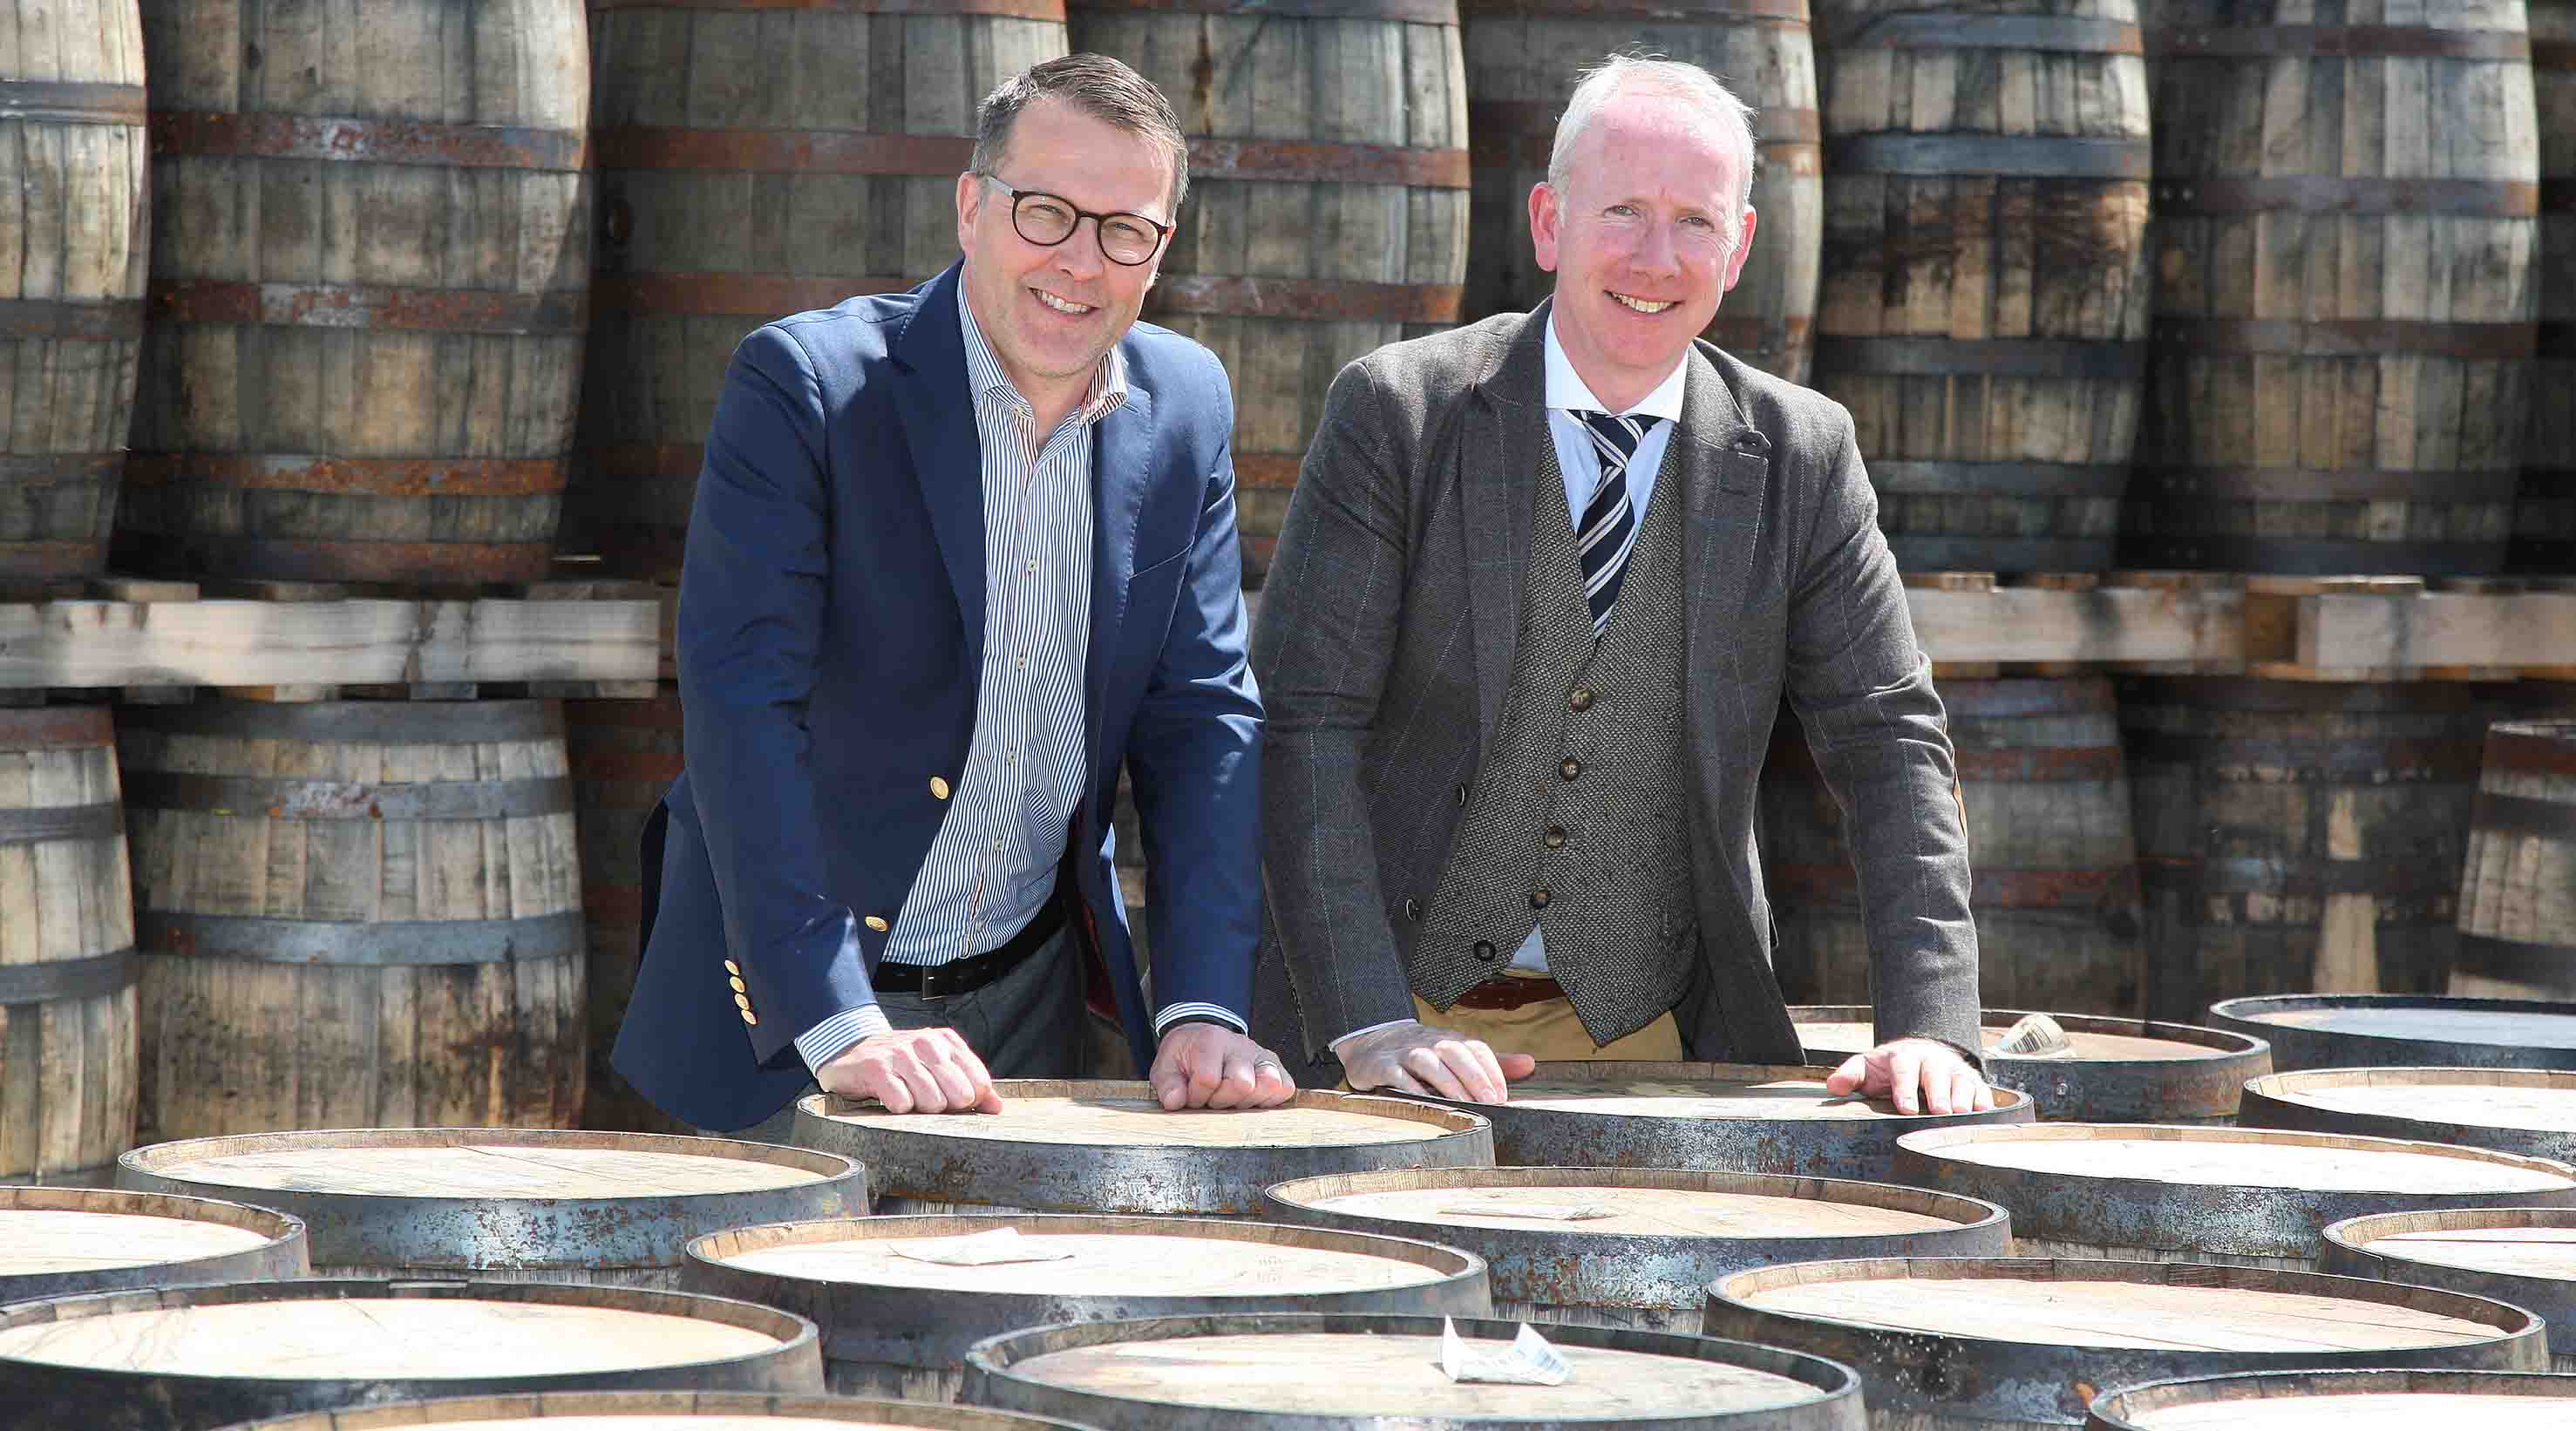 At the announcement of the partnership agreement for the supply of premium craft Irish Whiskey for the Nordic markets are (from left): Altia Chief Executive Pekka Tennilä and Walsh Whiskey Distillery Chief Executive Bernard Walsh.